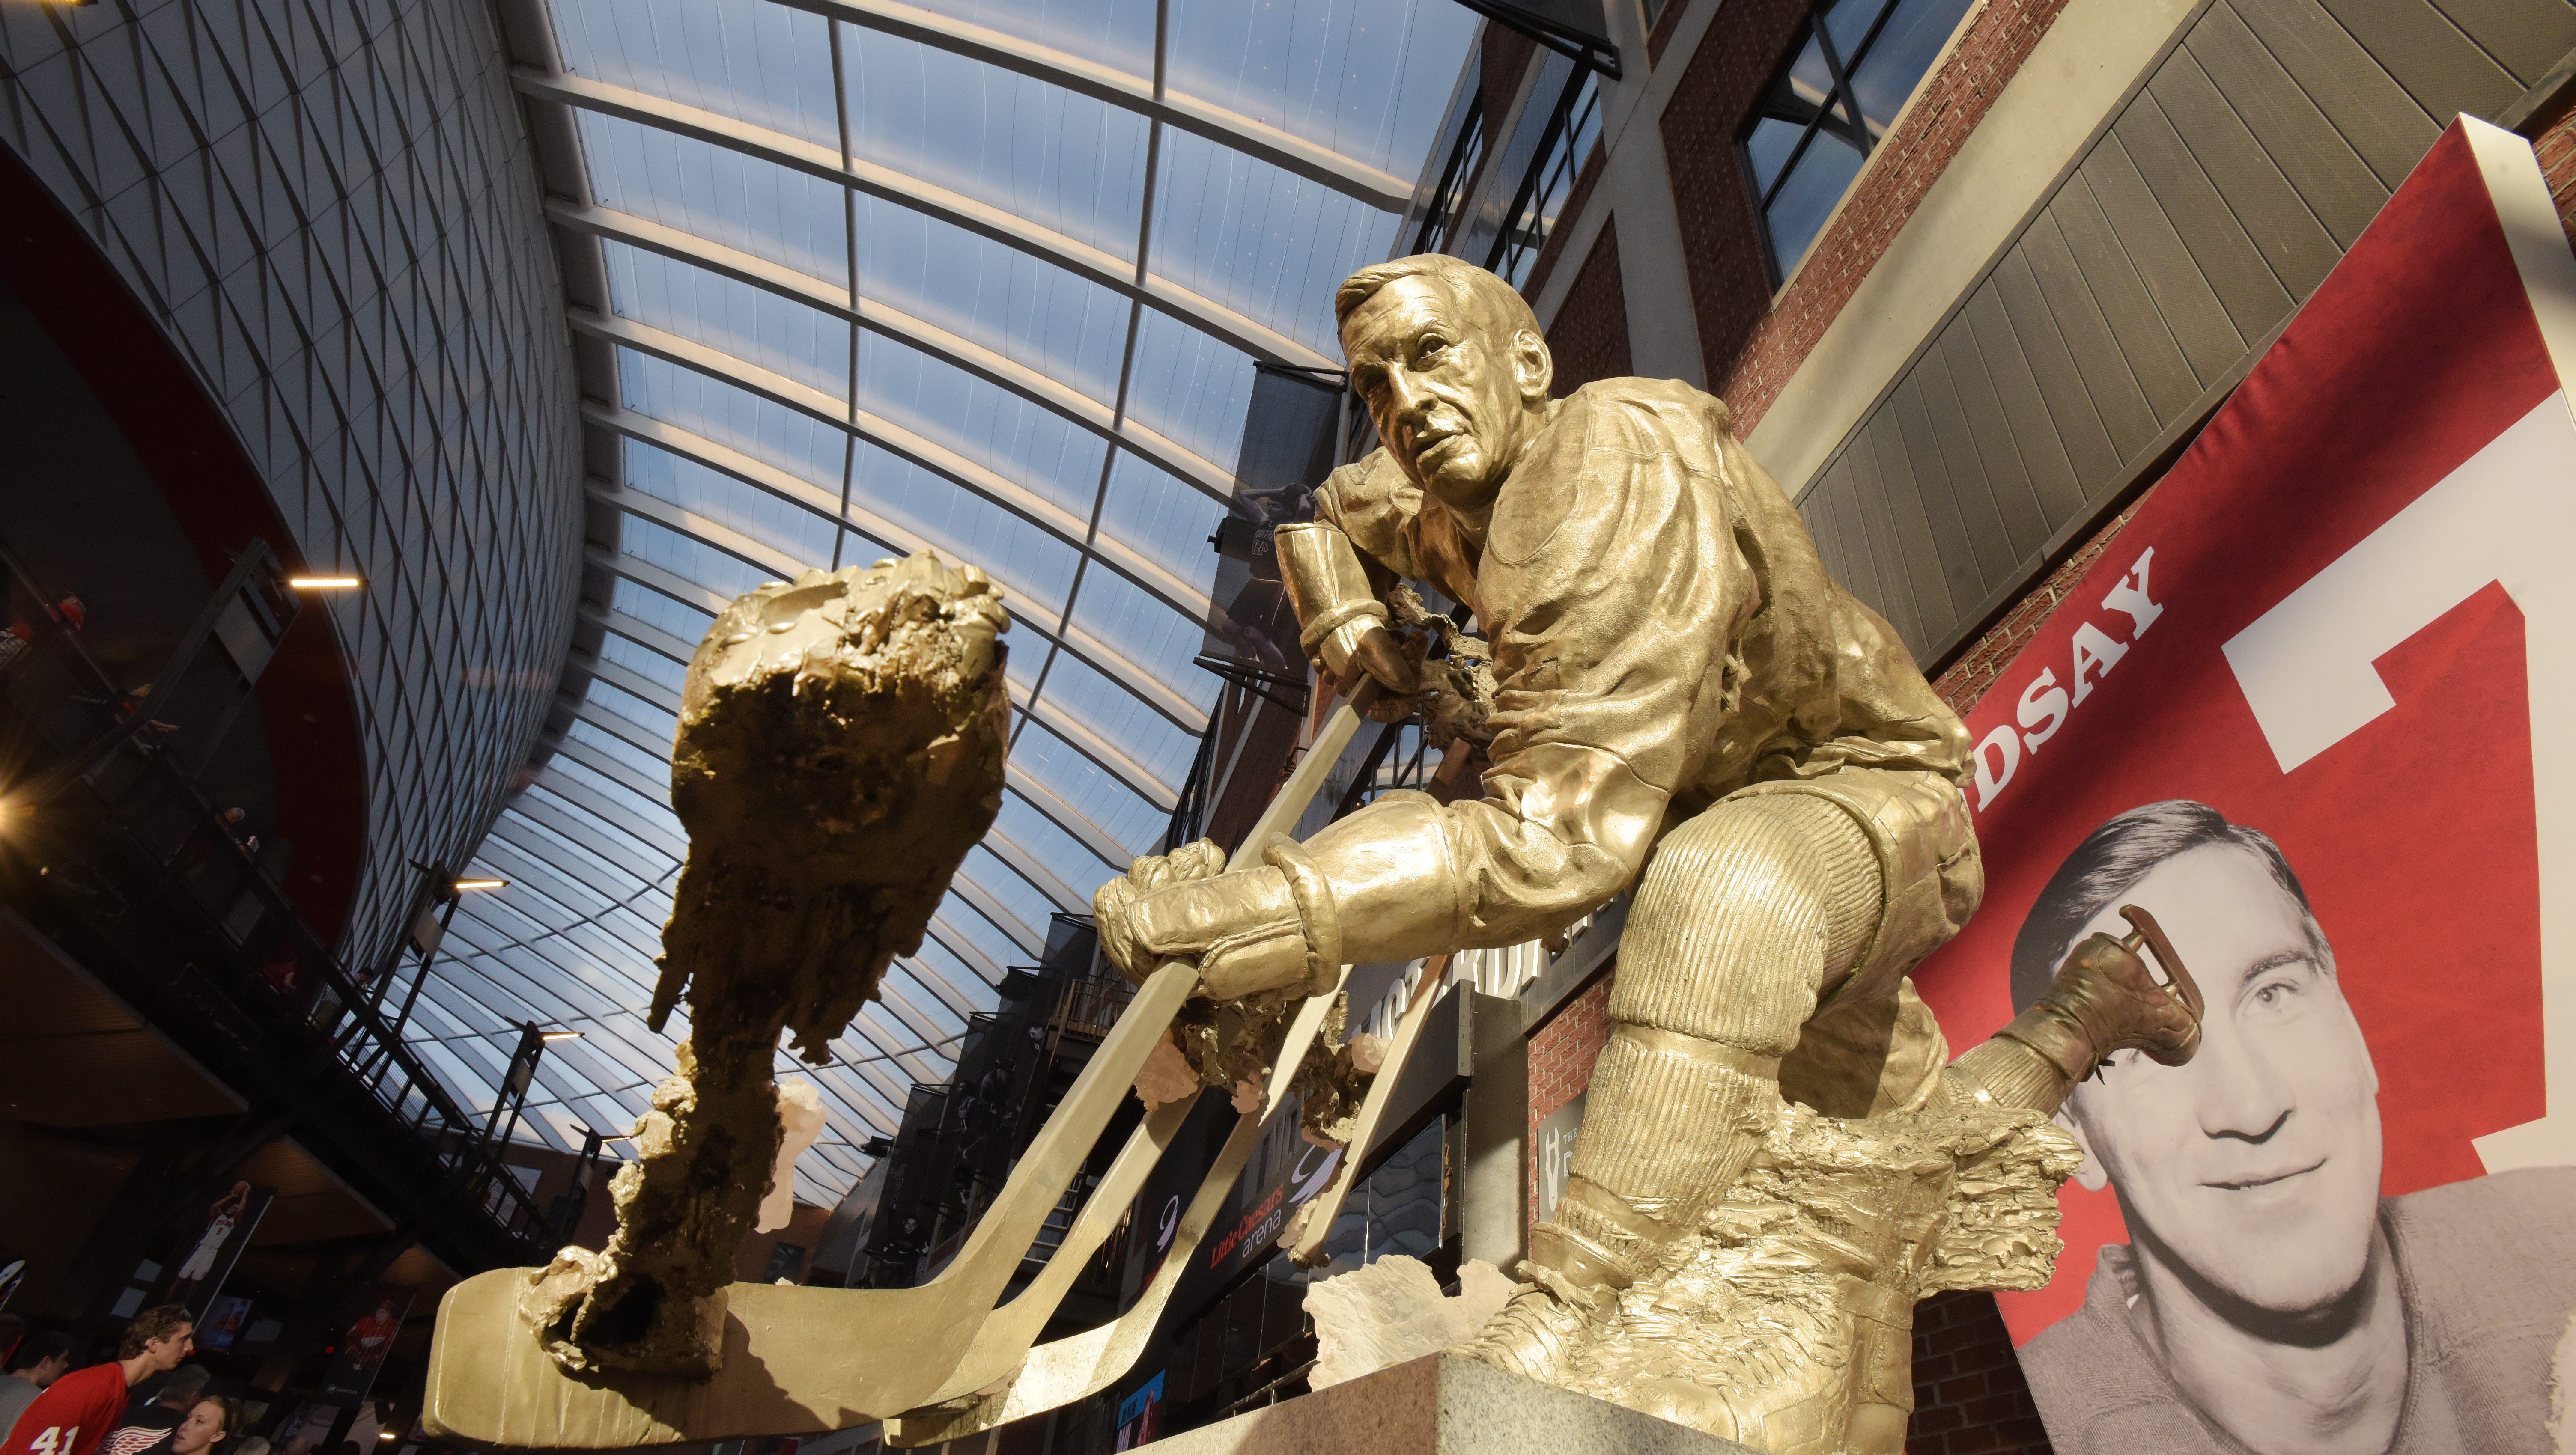 The new home of Red Wings great Ted Lindsay's statue along with others throughout Little Caesars Arena.